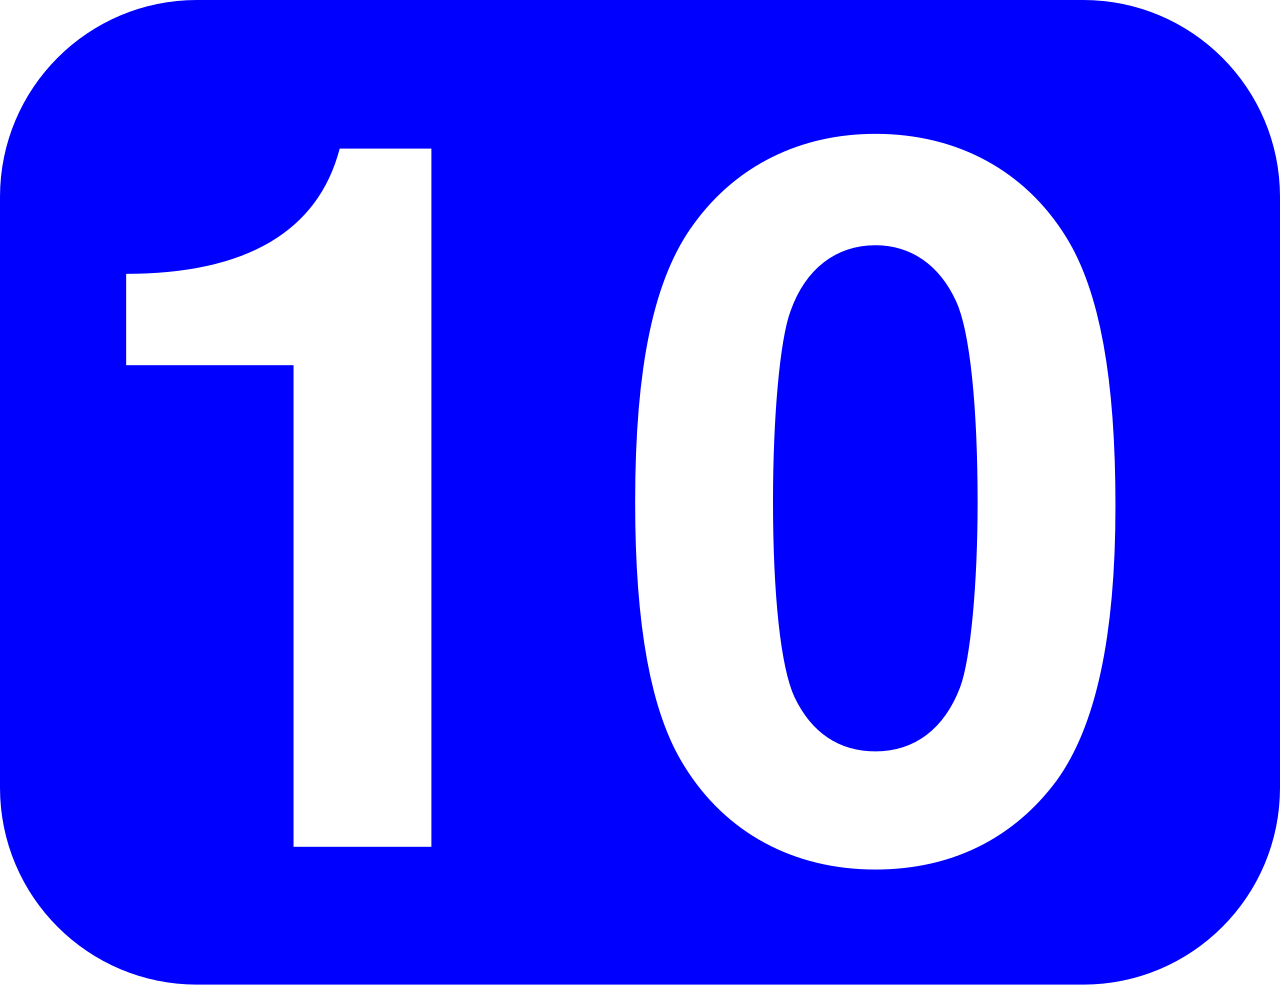 File:10 white, blue rounded rectangle.svg - Wikipedia